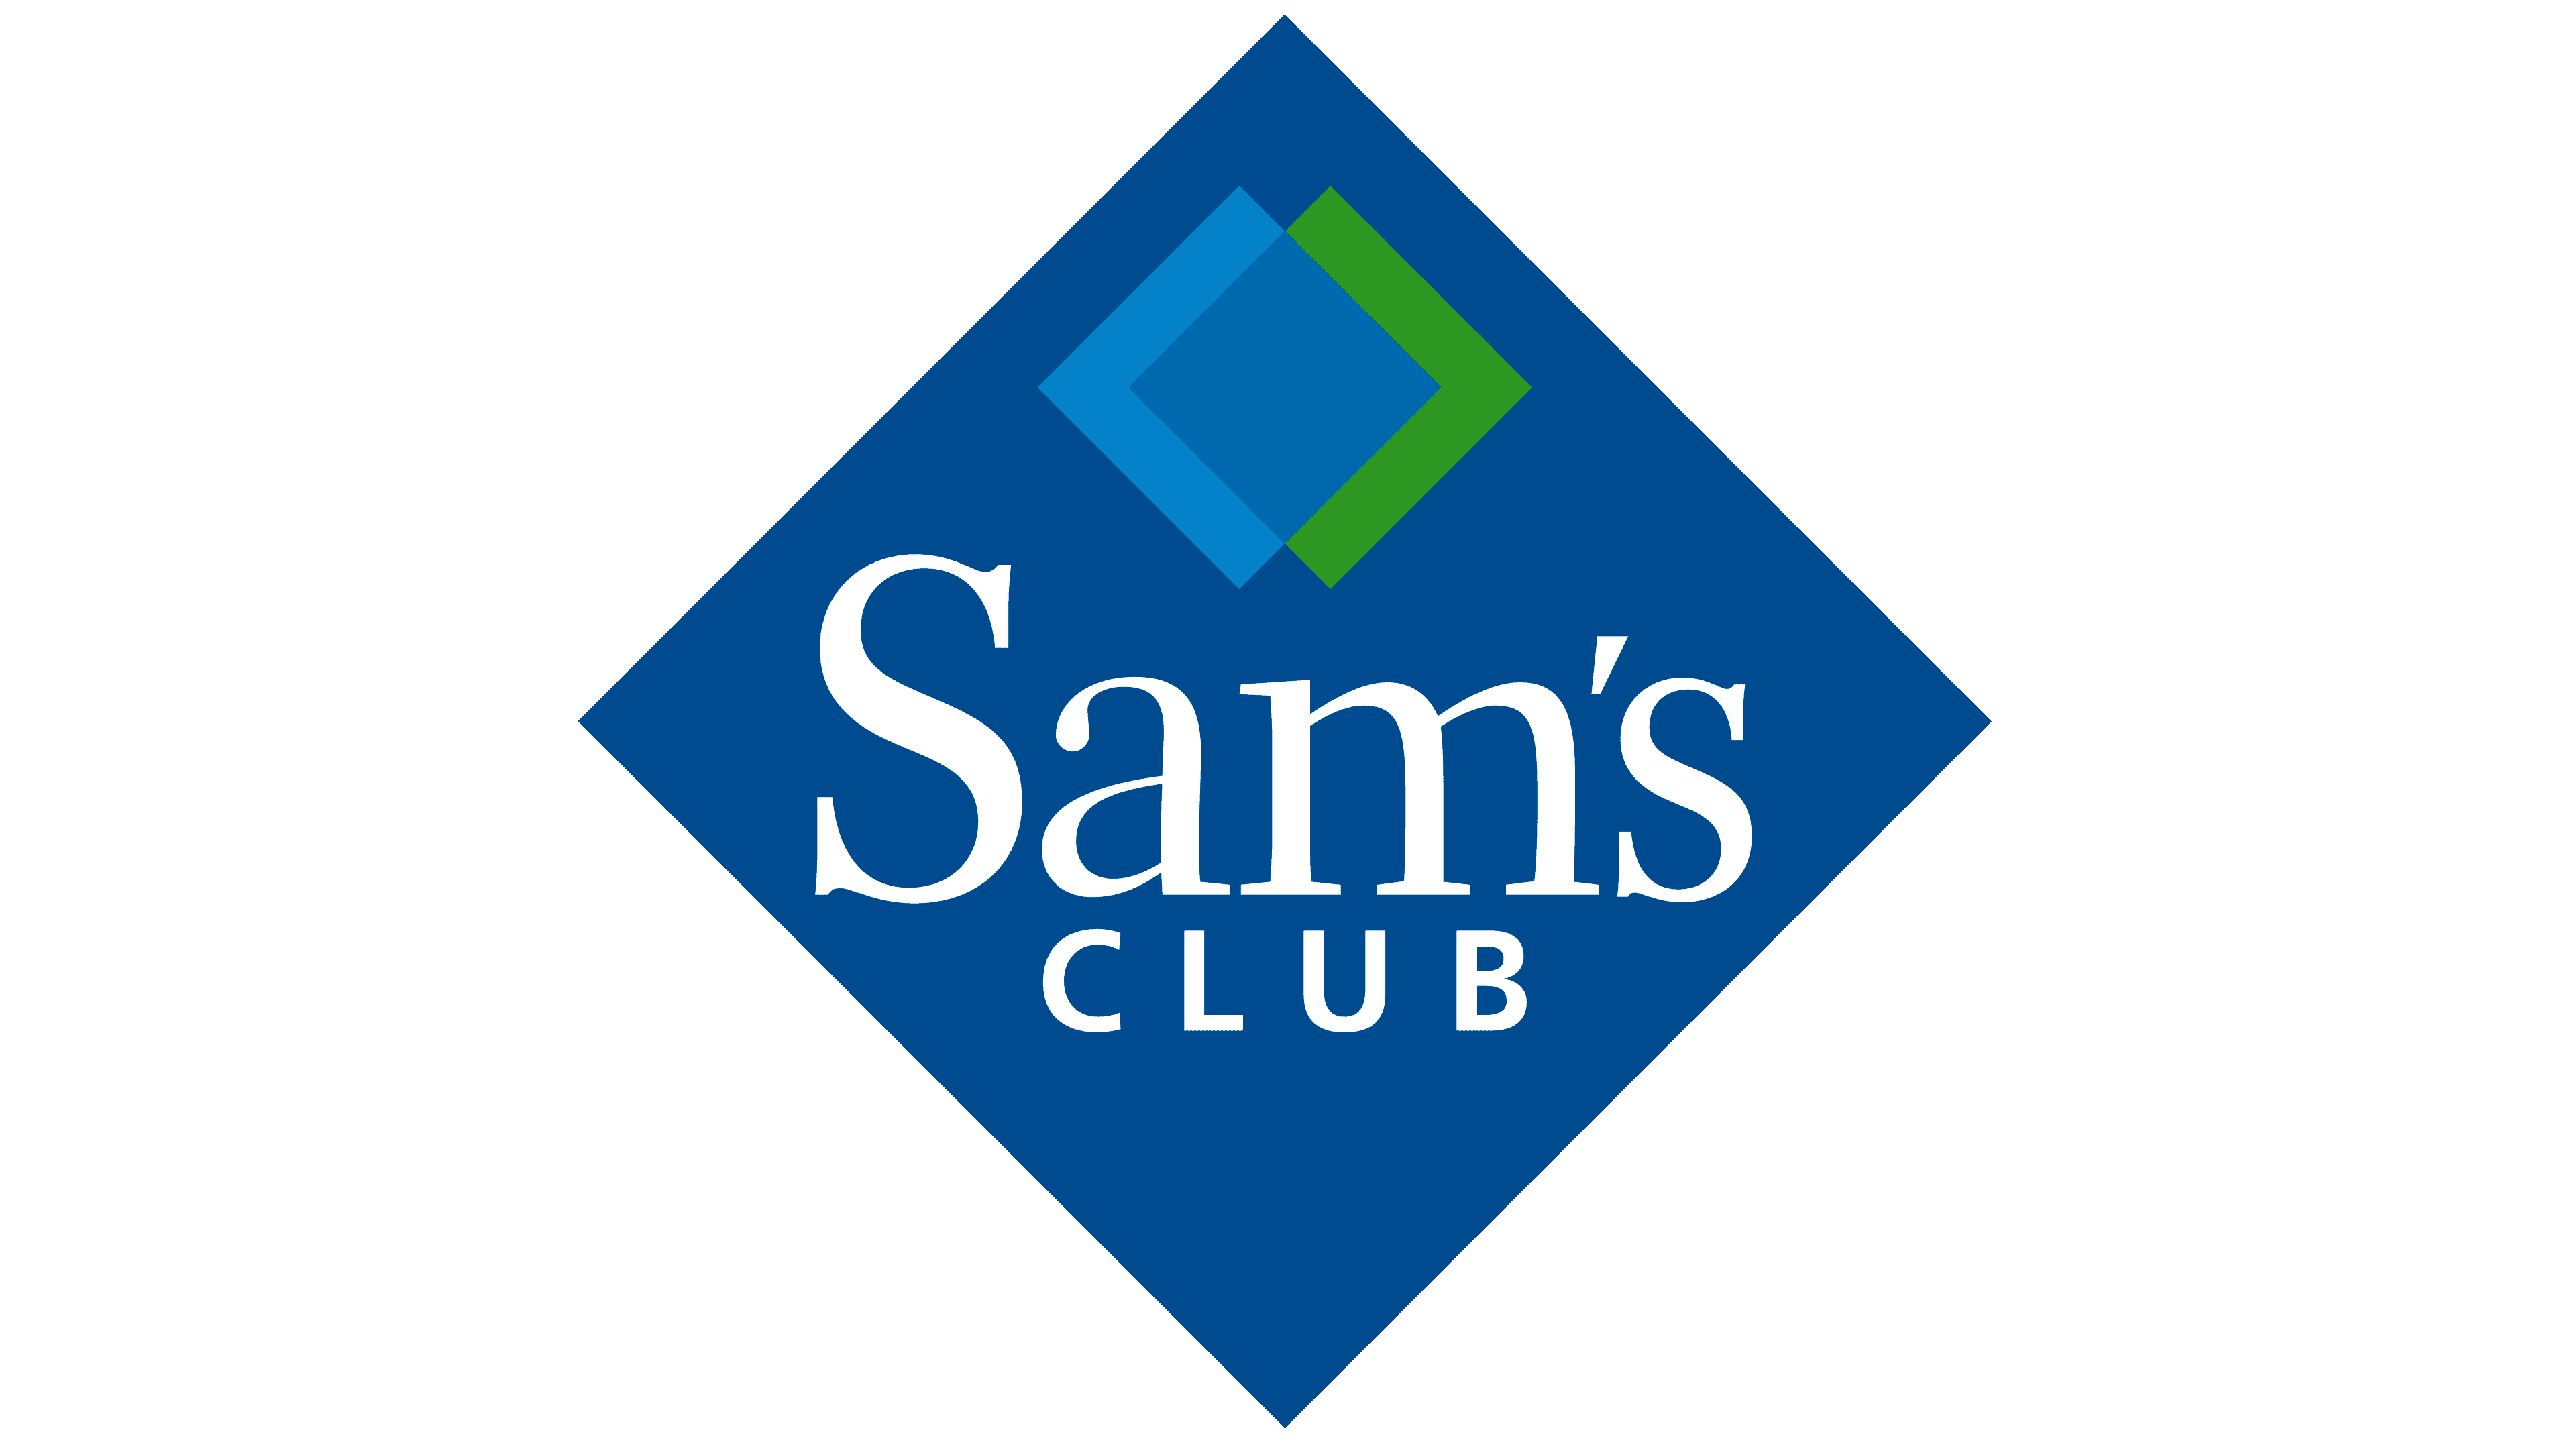 Free' Sam's Club membership deal gives you $45 to spend when you sign up